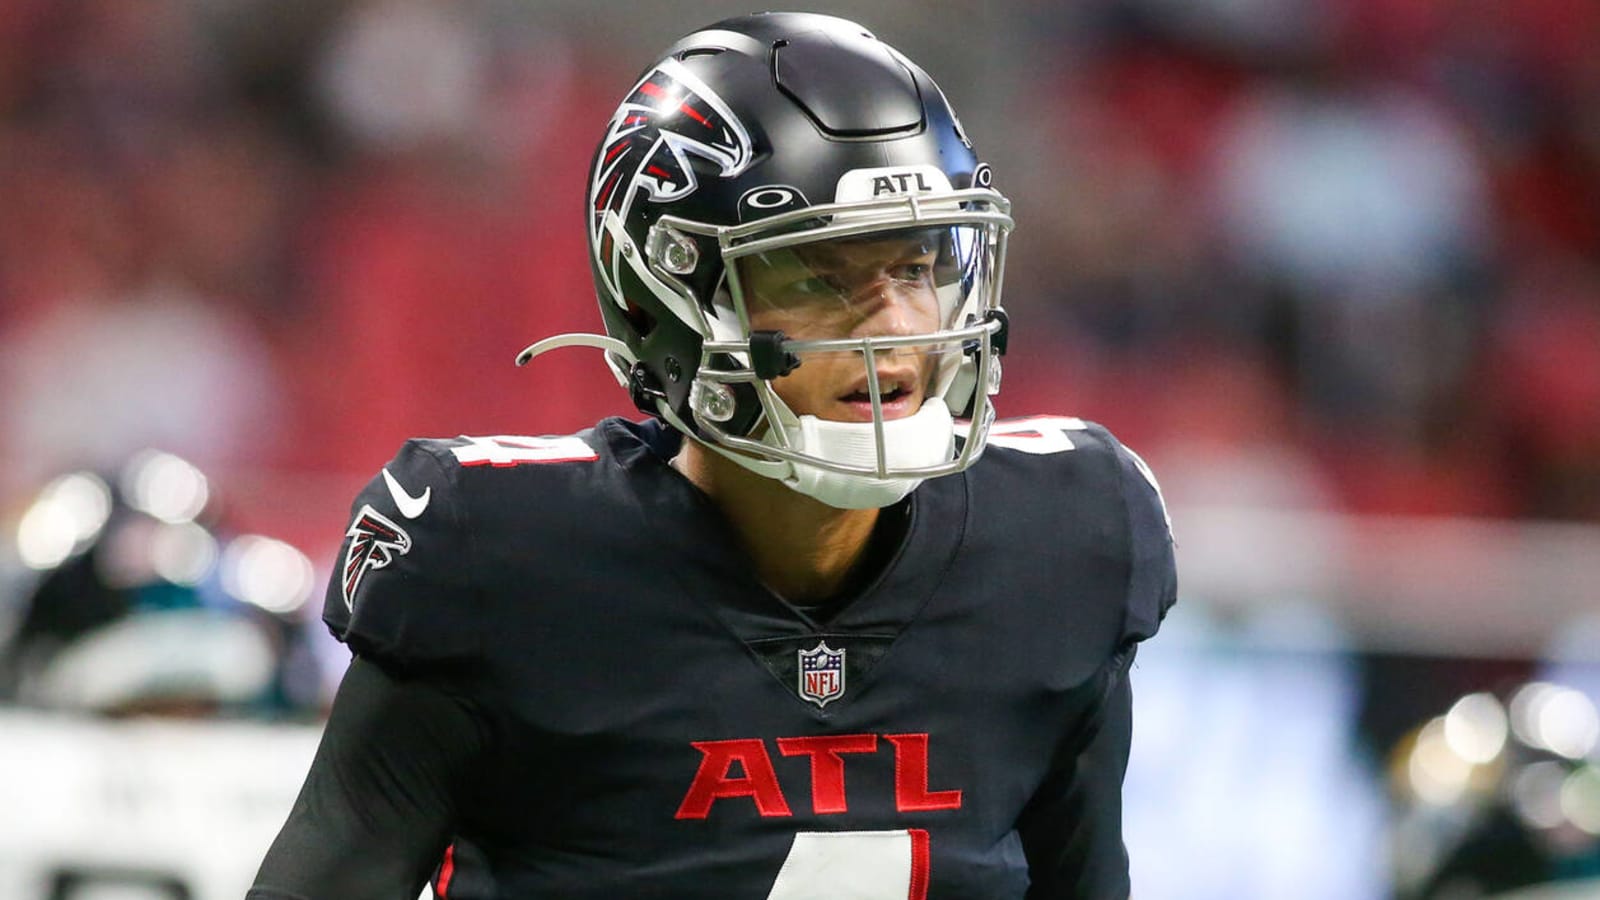 Falcons 'excited' about Desmond Ridder amid uncertainty at QB